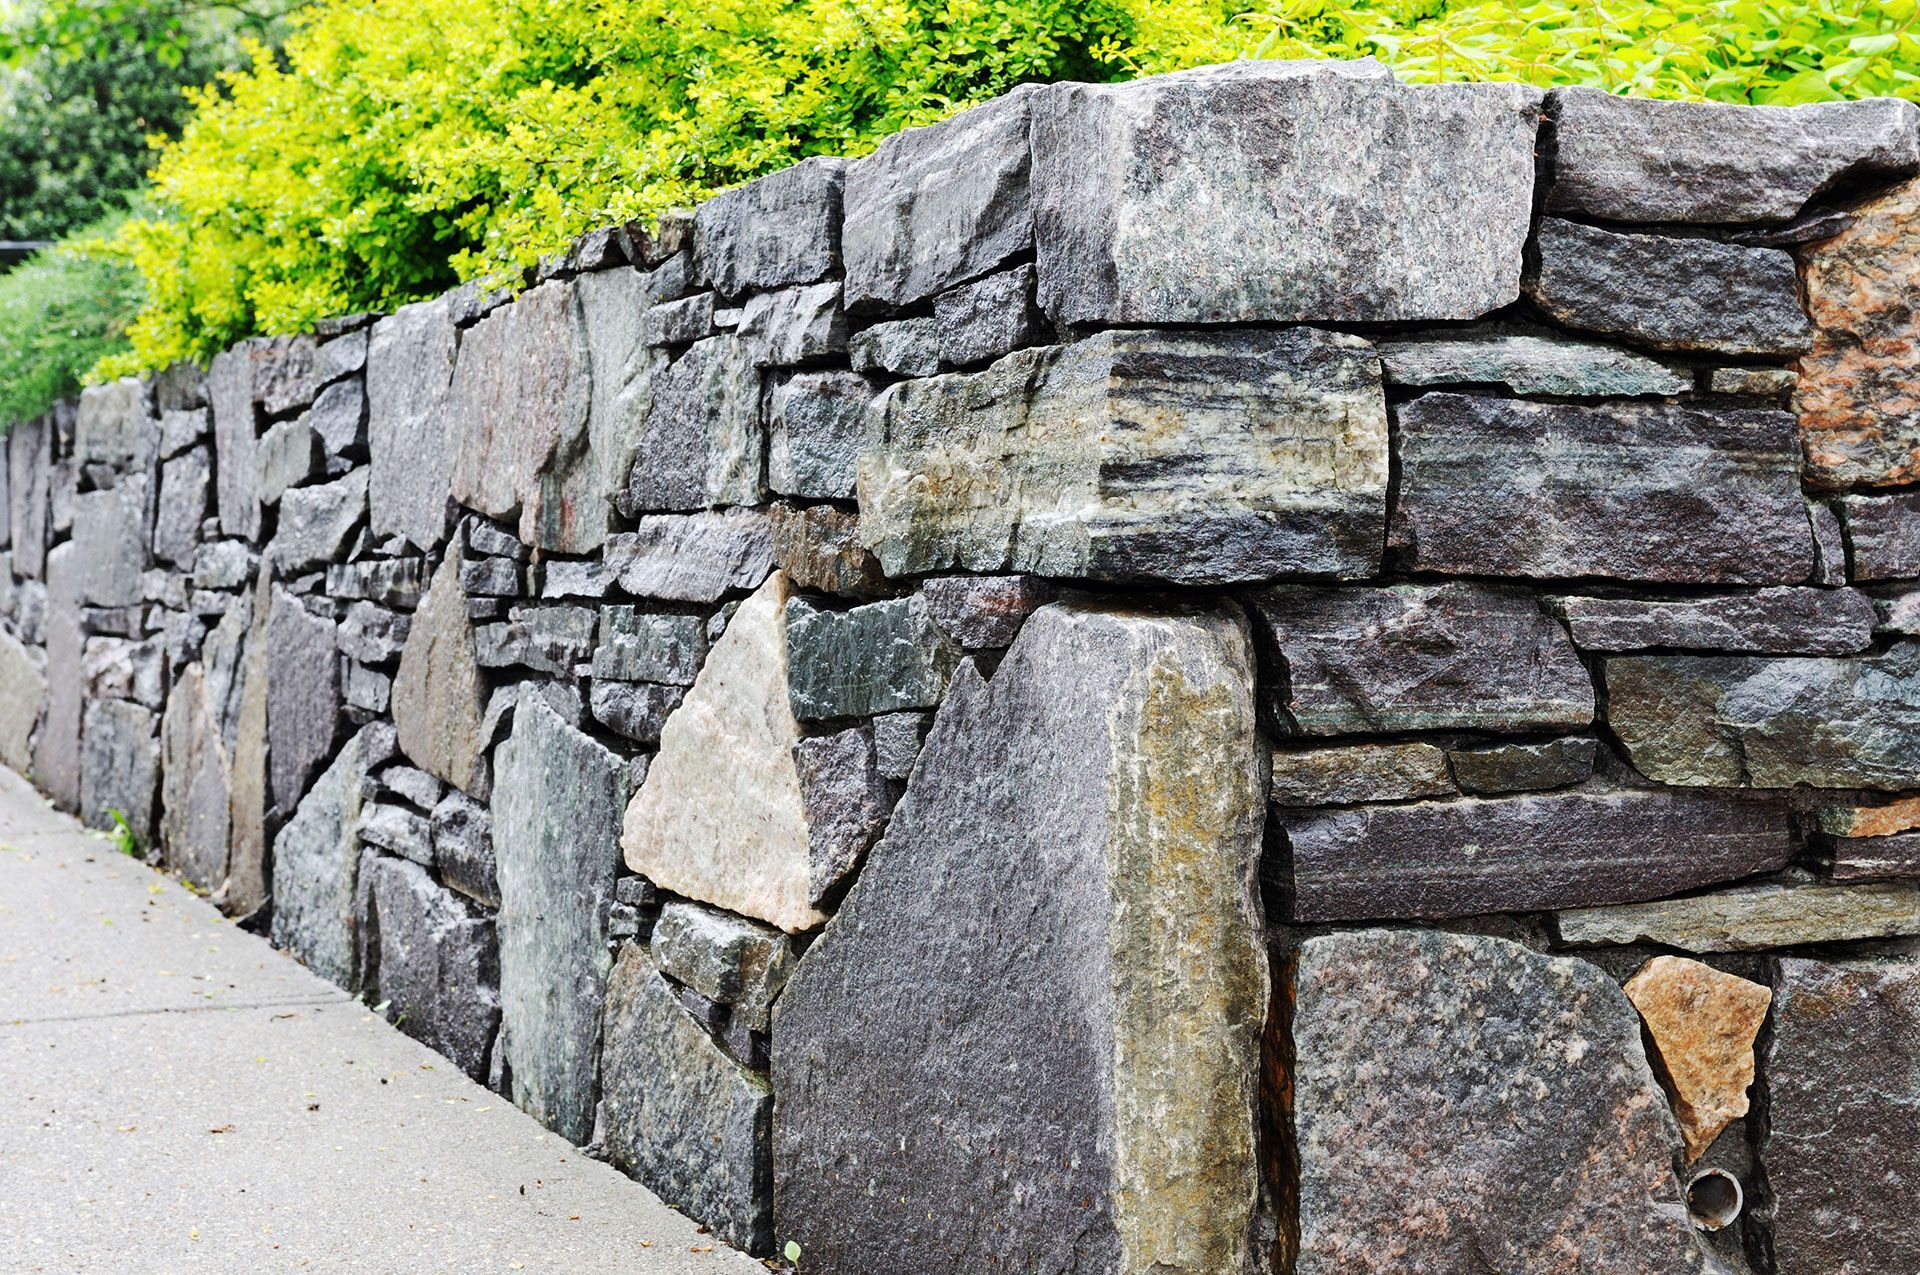 A stone wall along a sidewalk with trees in the background